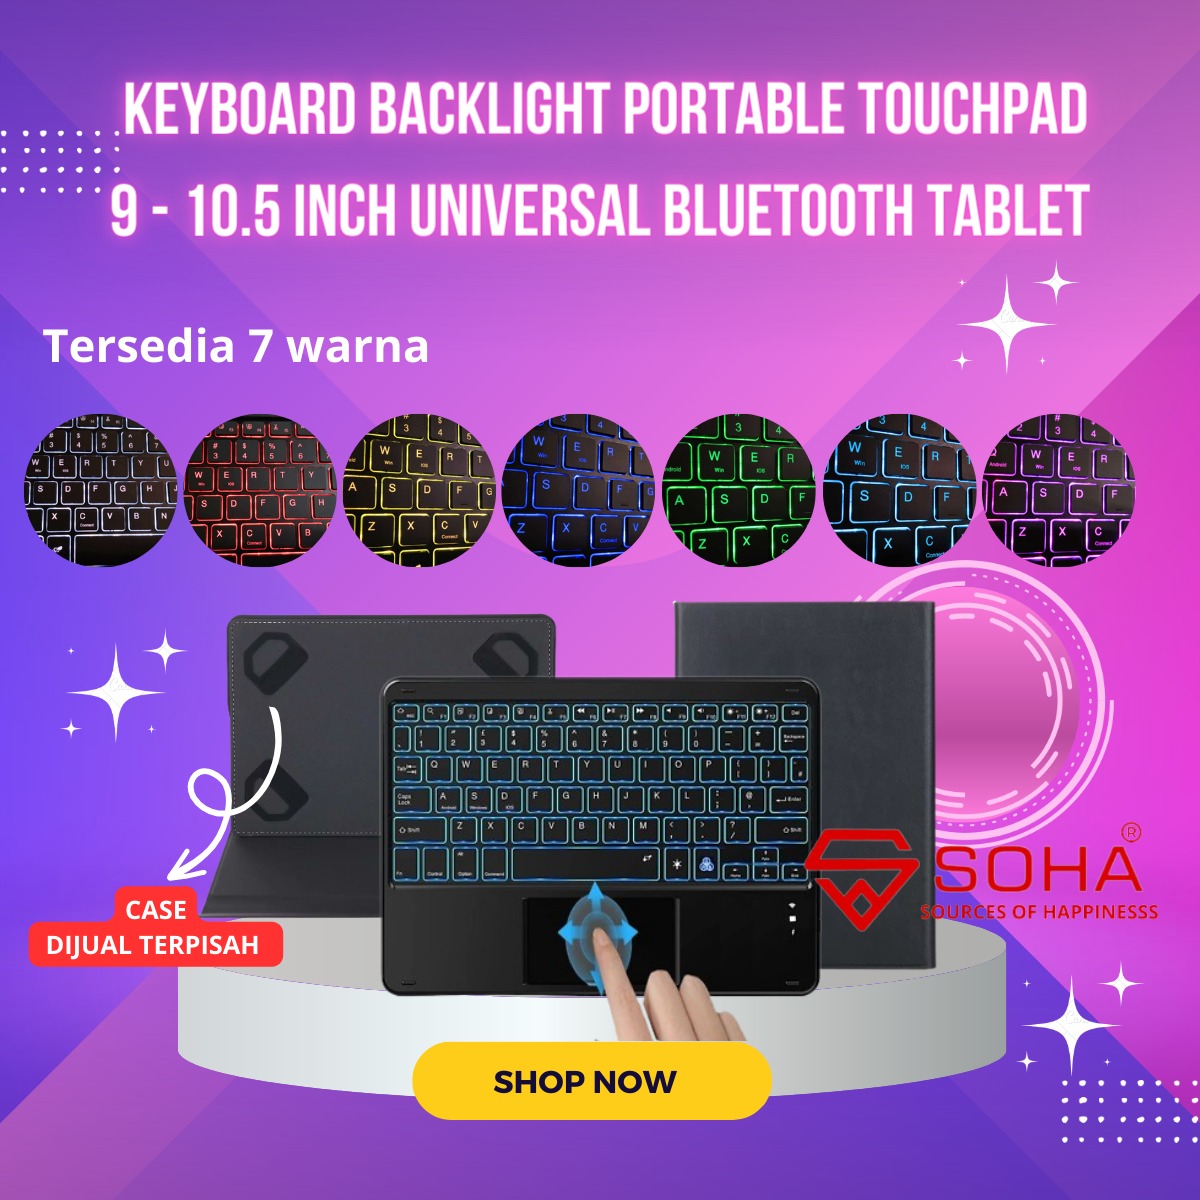 KYB-028 Keyboard Backlight Portable Touchpad 9 - 10.5 INCH Universal Bluetooth Tablet for Windows Smartphone Samsung Huawei Android IOS Ipad Wireless